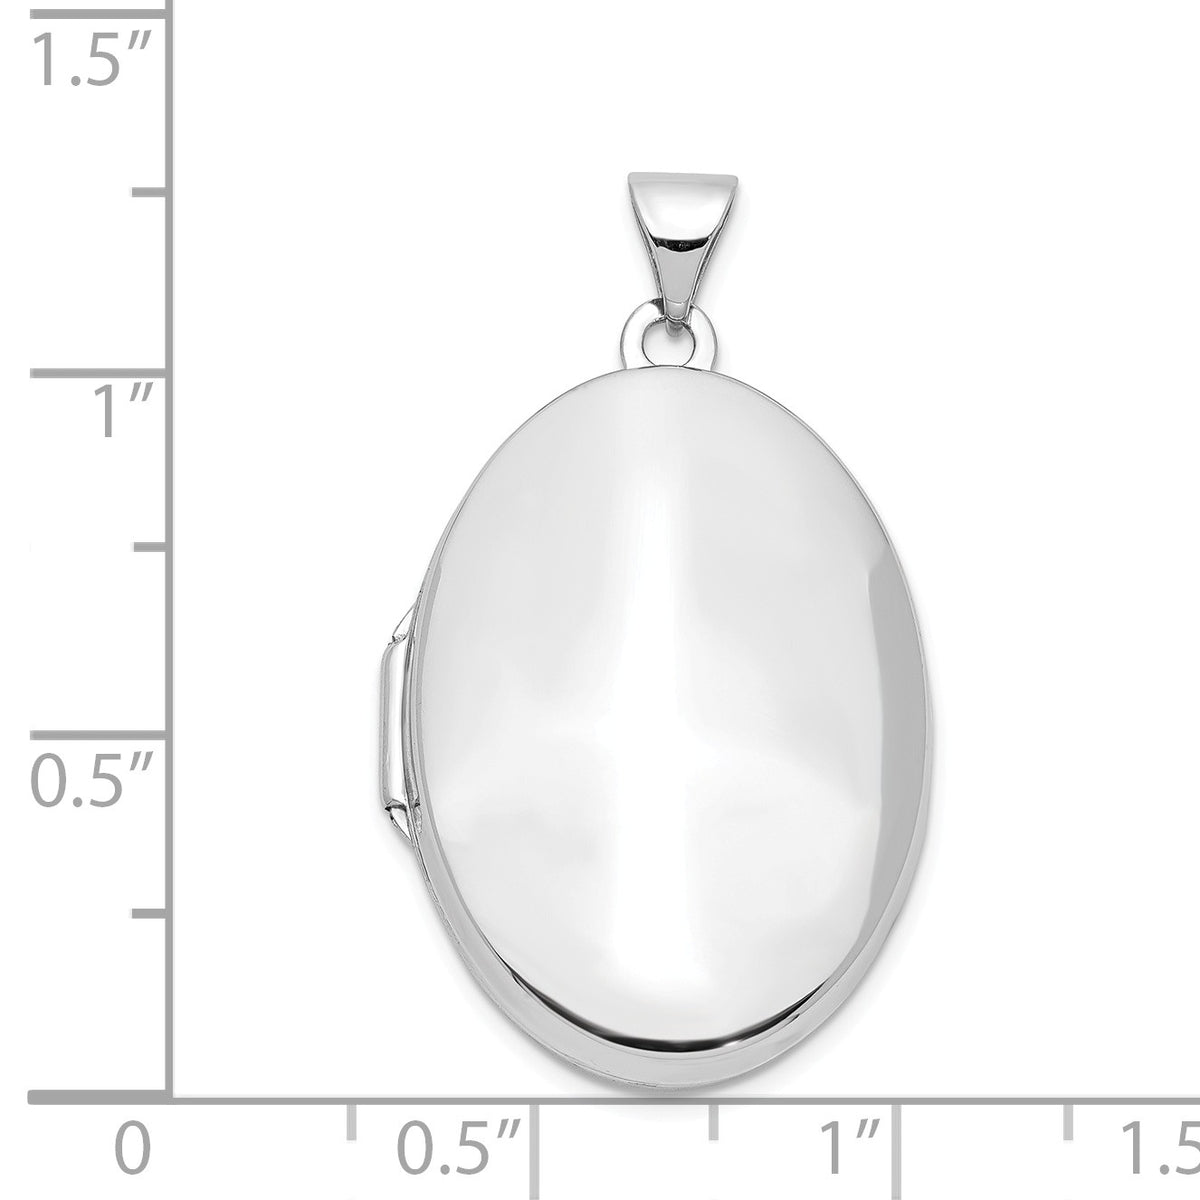 Alternate view of the 14k White Gold Polished Domed Locket, 26mm by The Black Bow Jewelry Co.